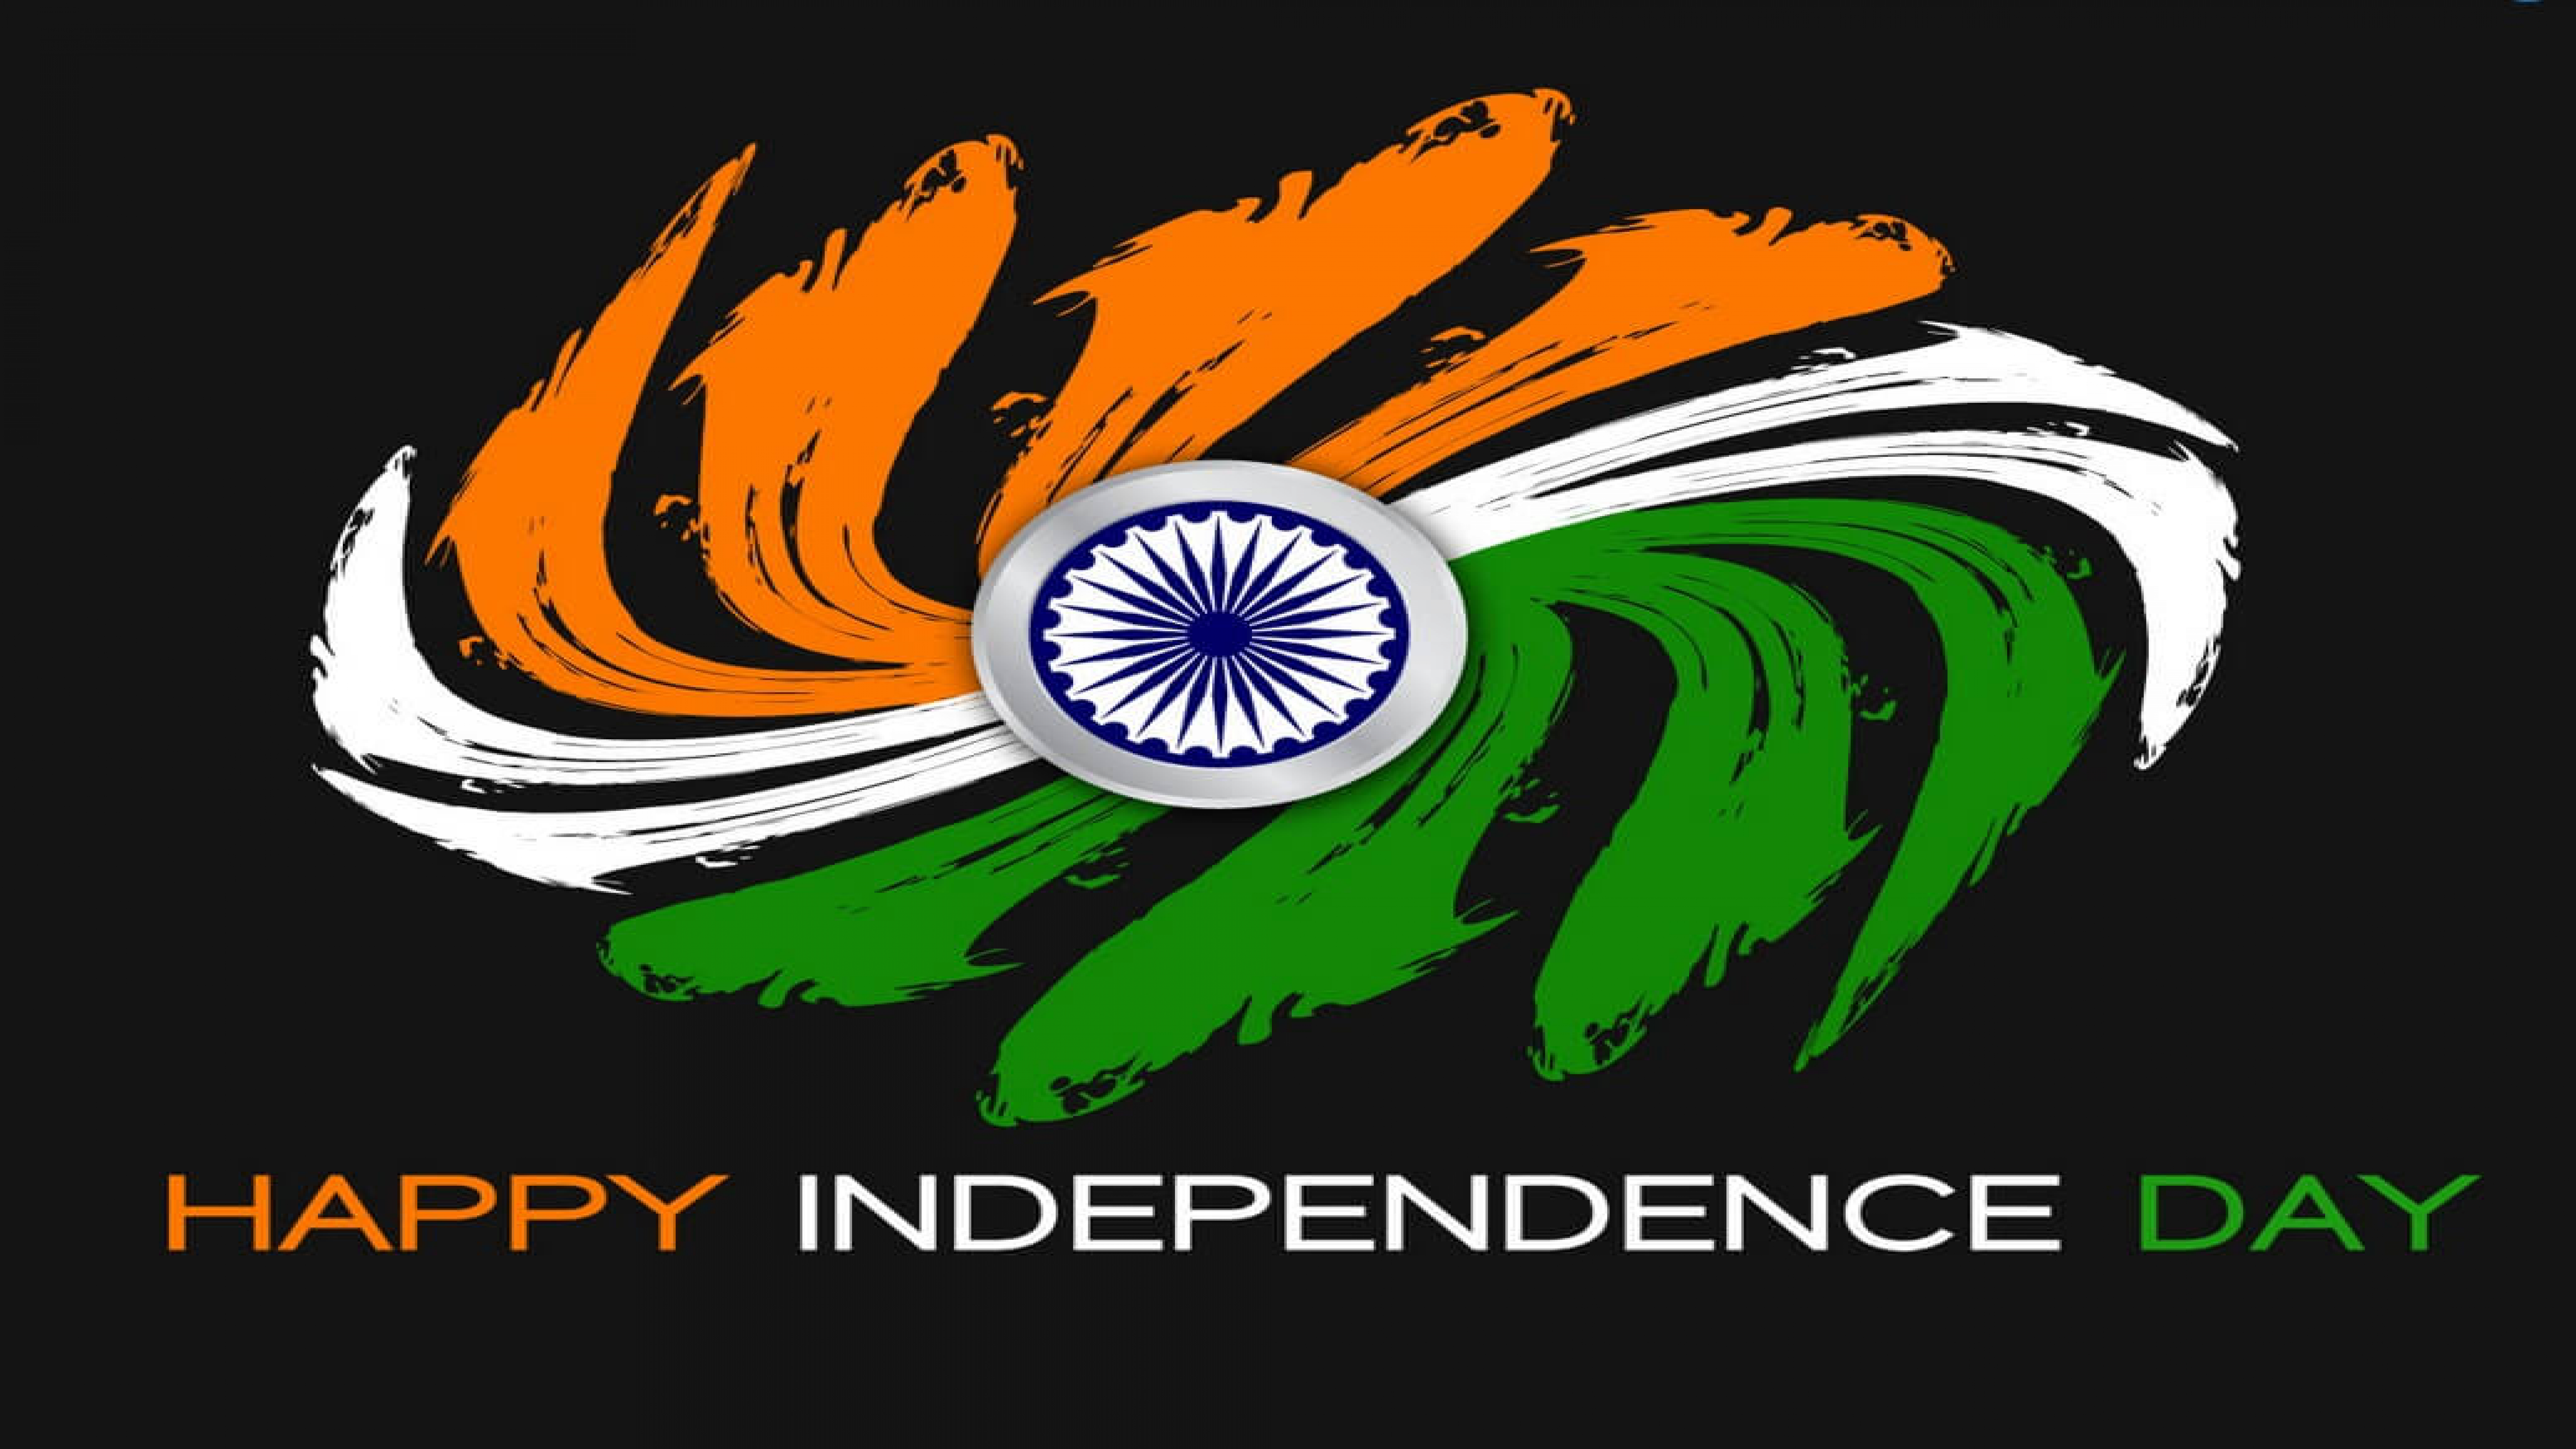 Independence Day Wallpapers 2015 With Indian Army - Wallpaper Cave